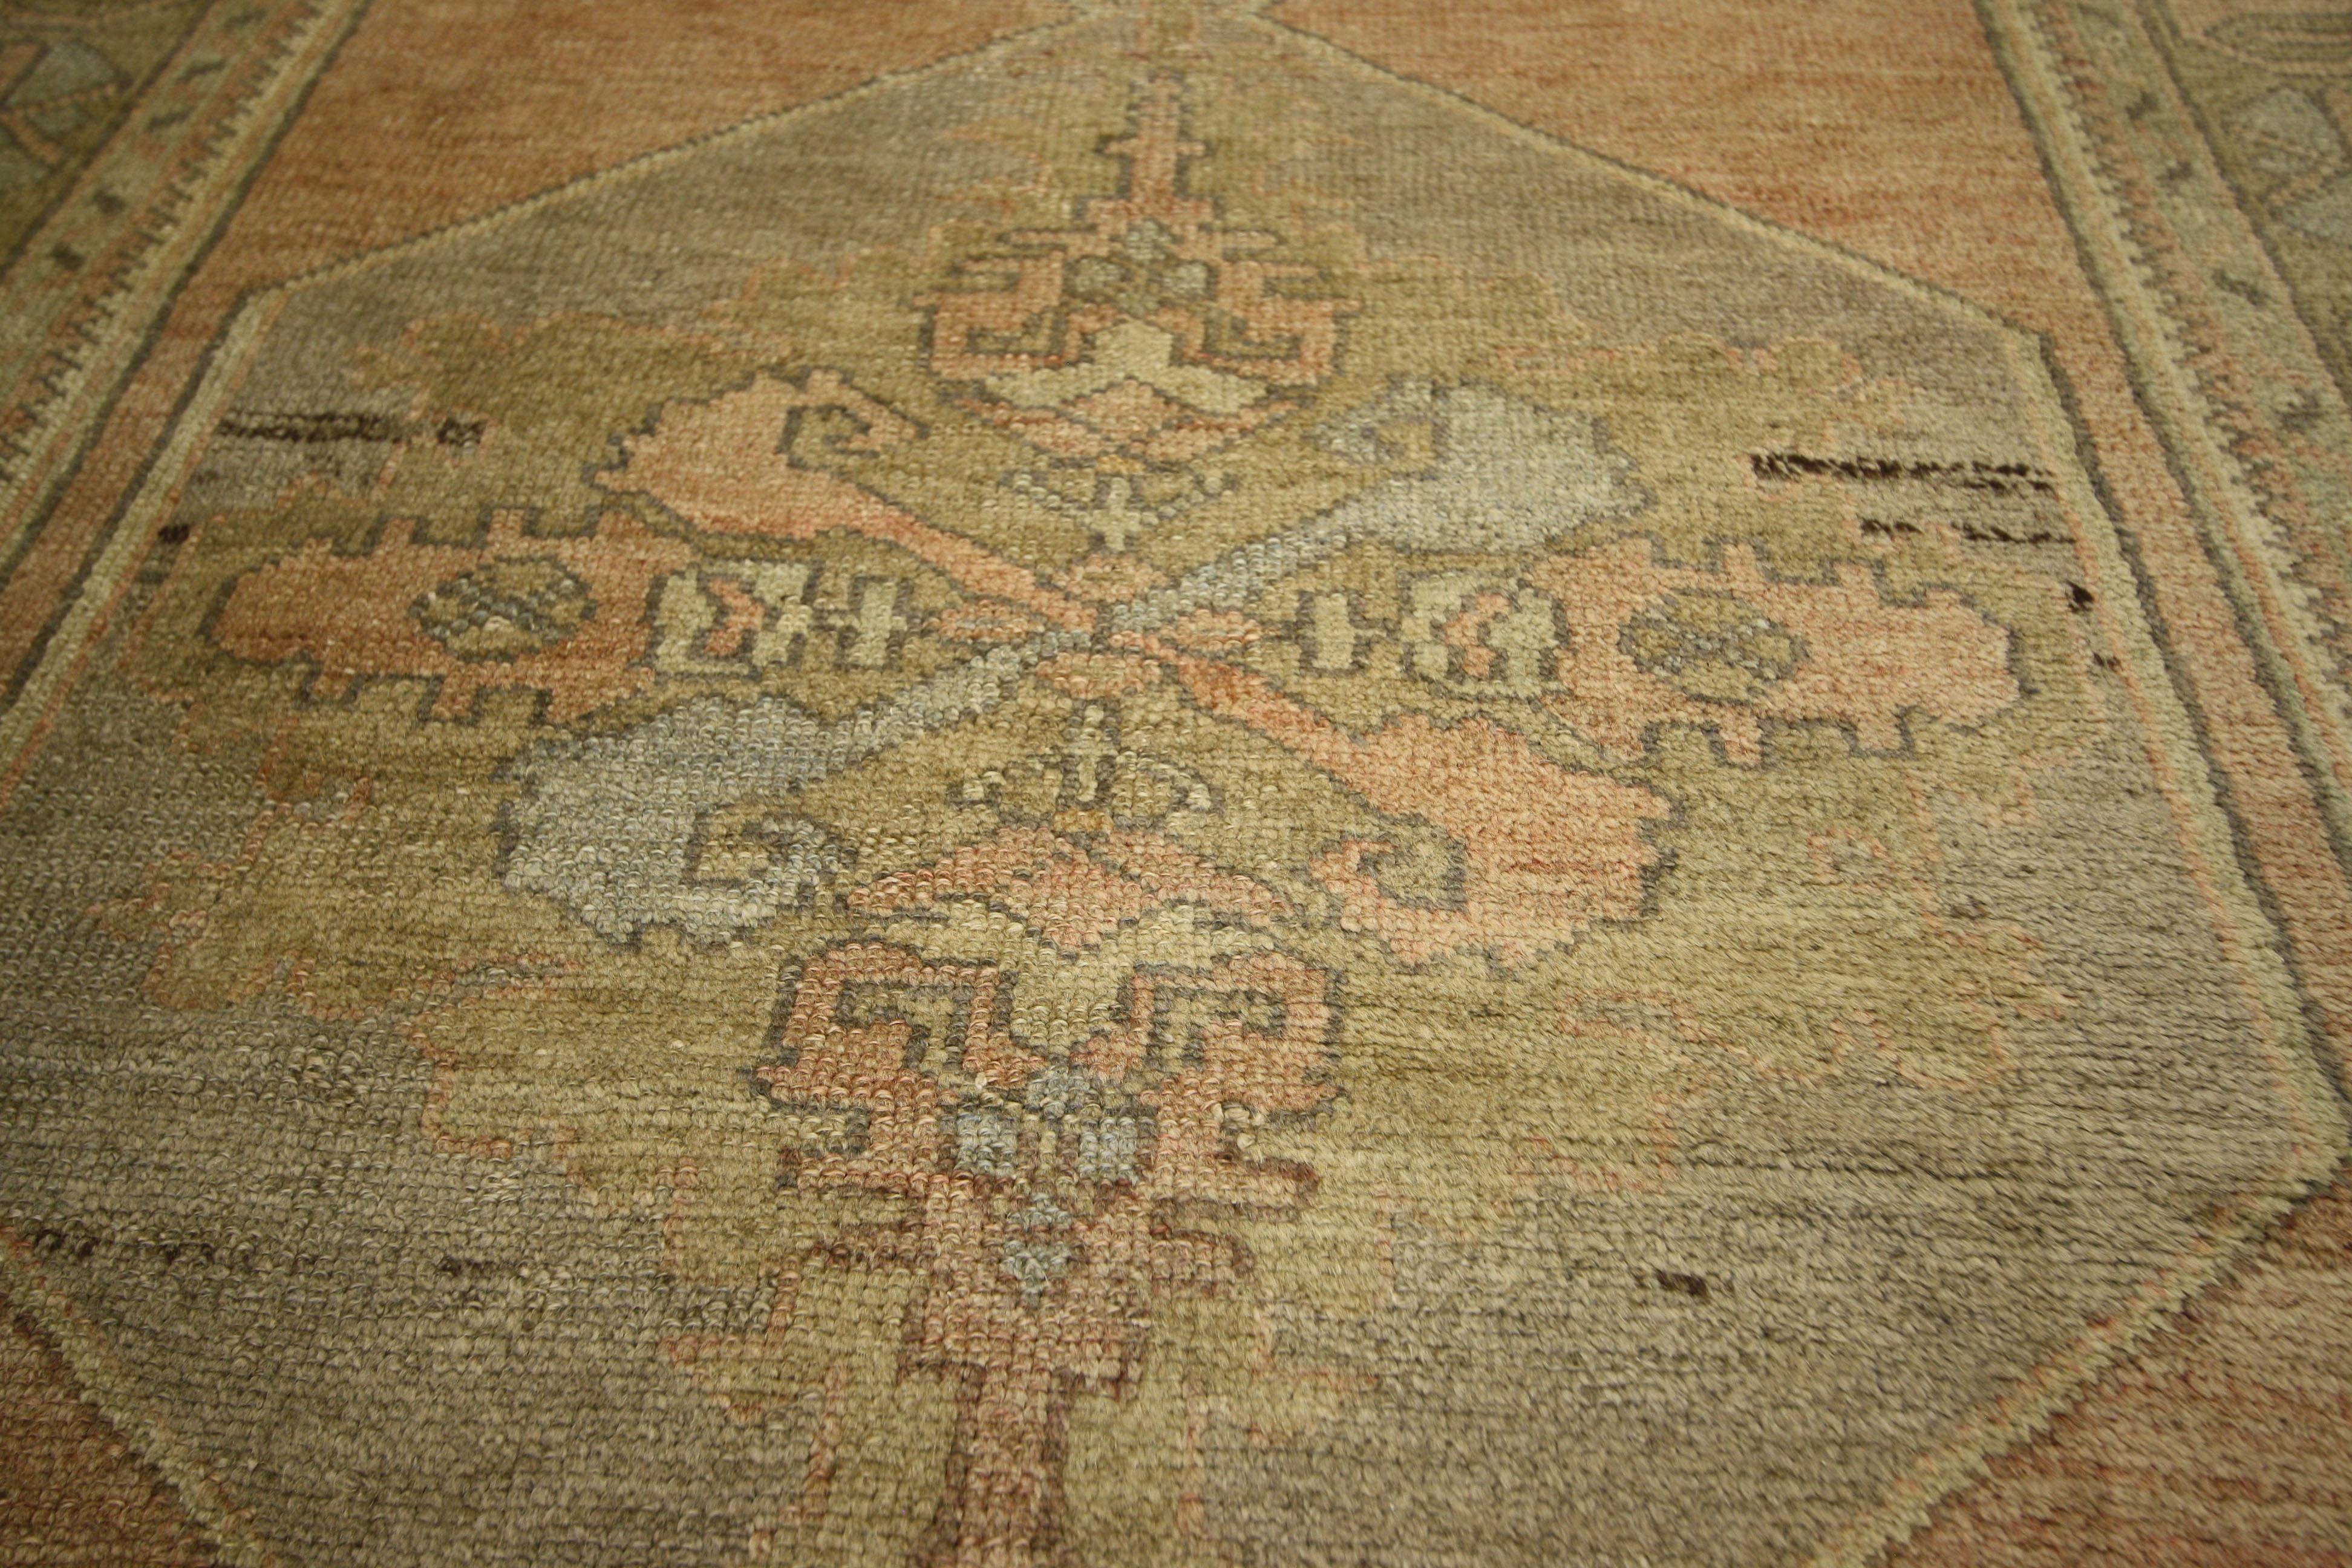 50184 Vintage Turkish Oushak Runner with Modern Rustic Artisan Style, Hallway Carpet Runner 03'07 x 10'03. Warm and inviting, this hand knotted wool antique-washed vintage Turkish Oushak runner beautifully embodies a Modern Rustic style with Artisan